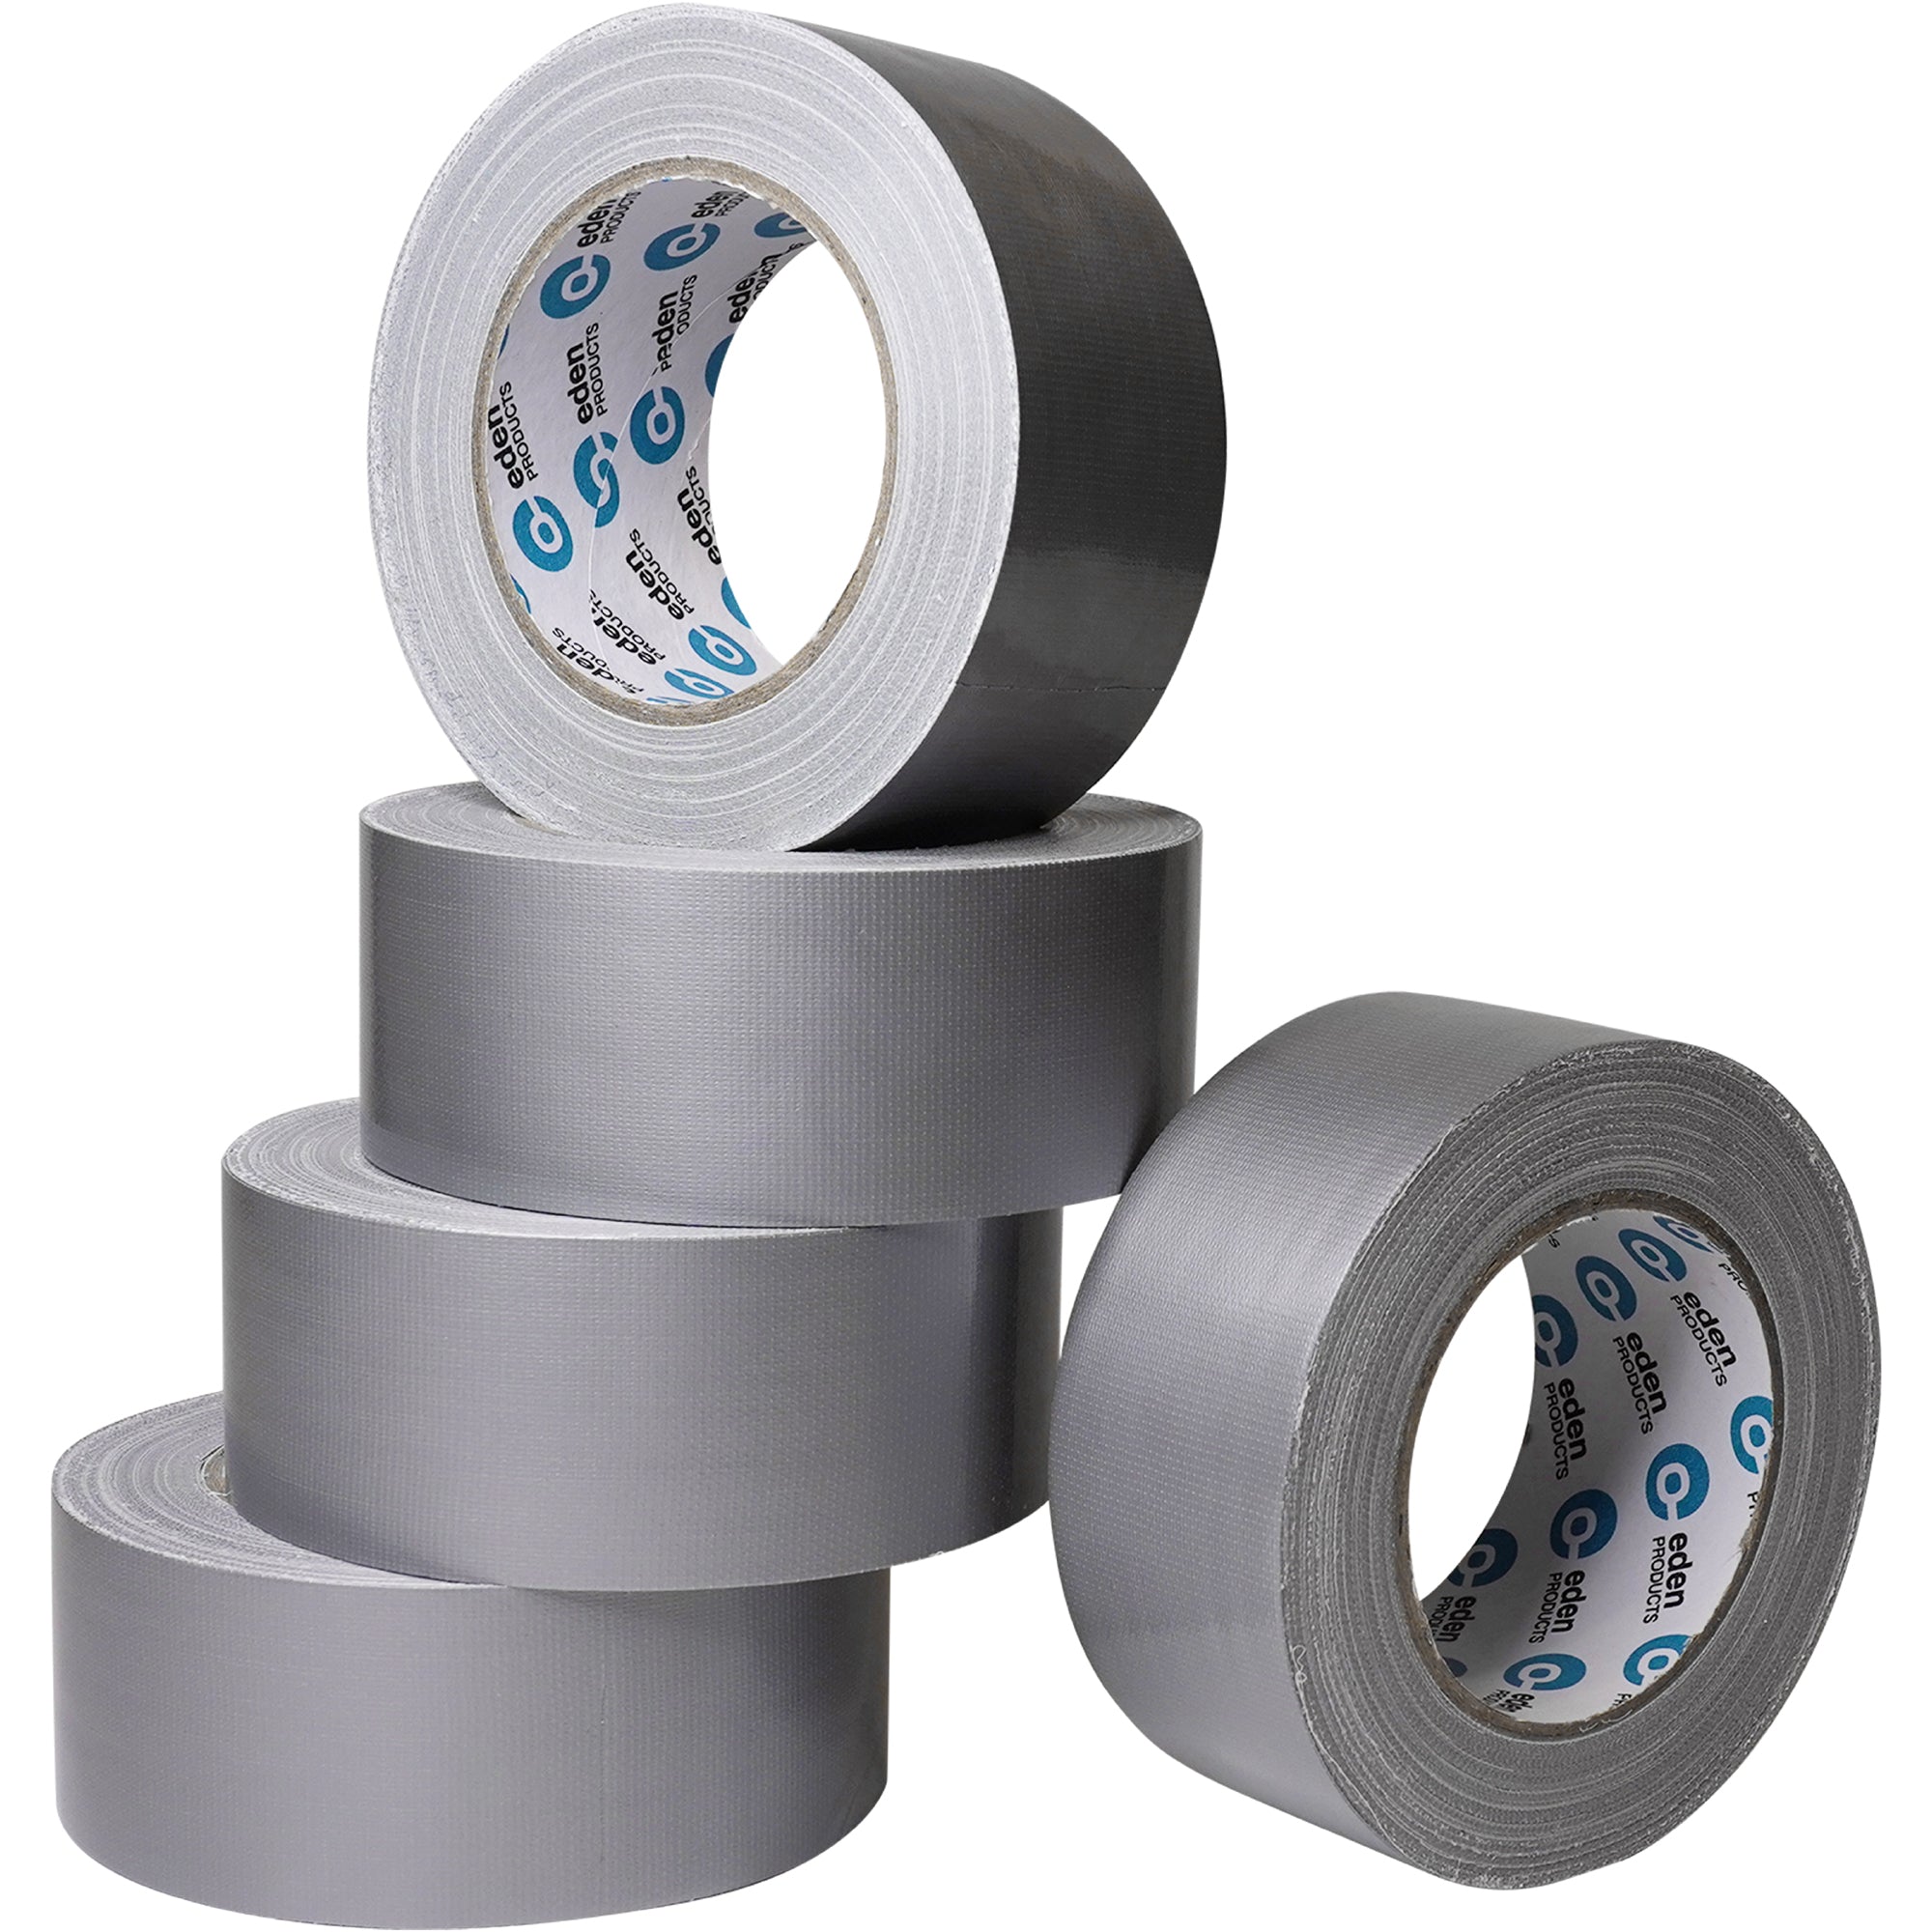 EdenProducts Heavy Duty Industrial Silver/Gray Duct Tape Roll Mult